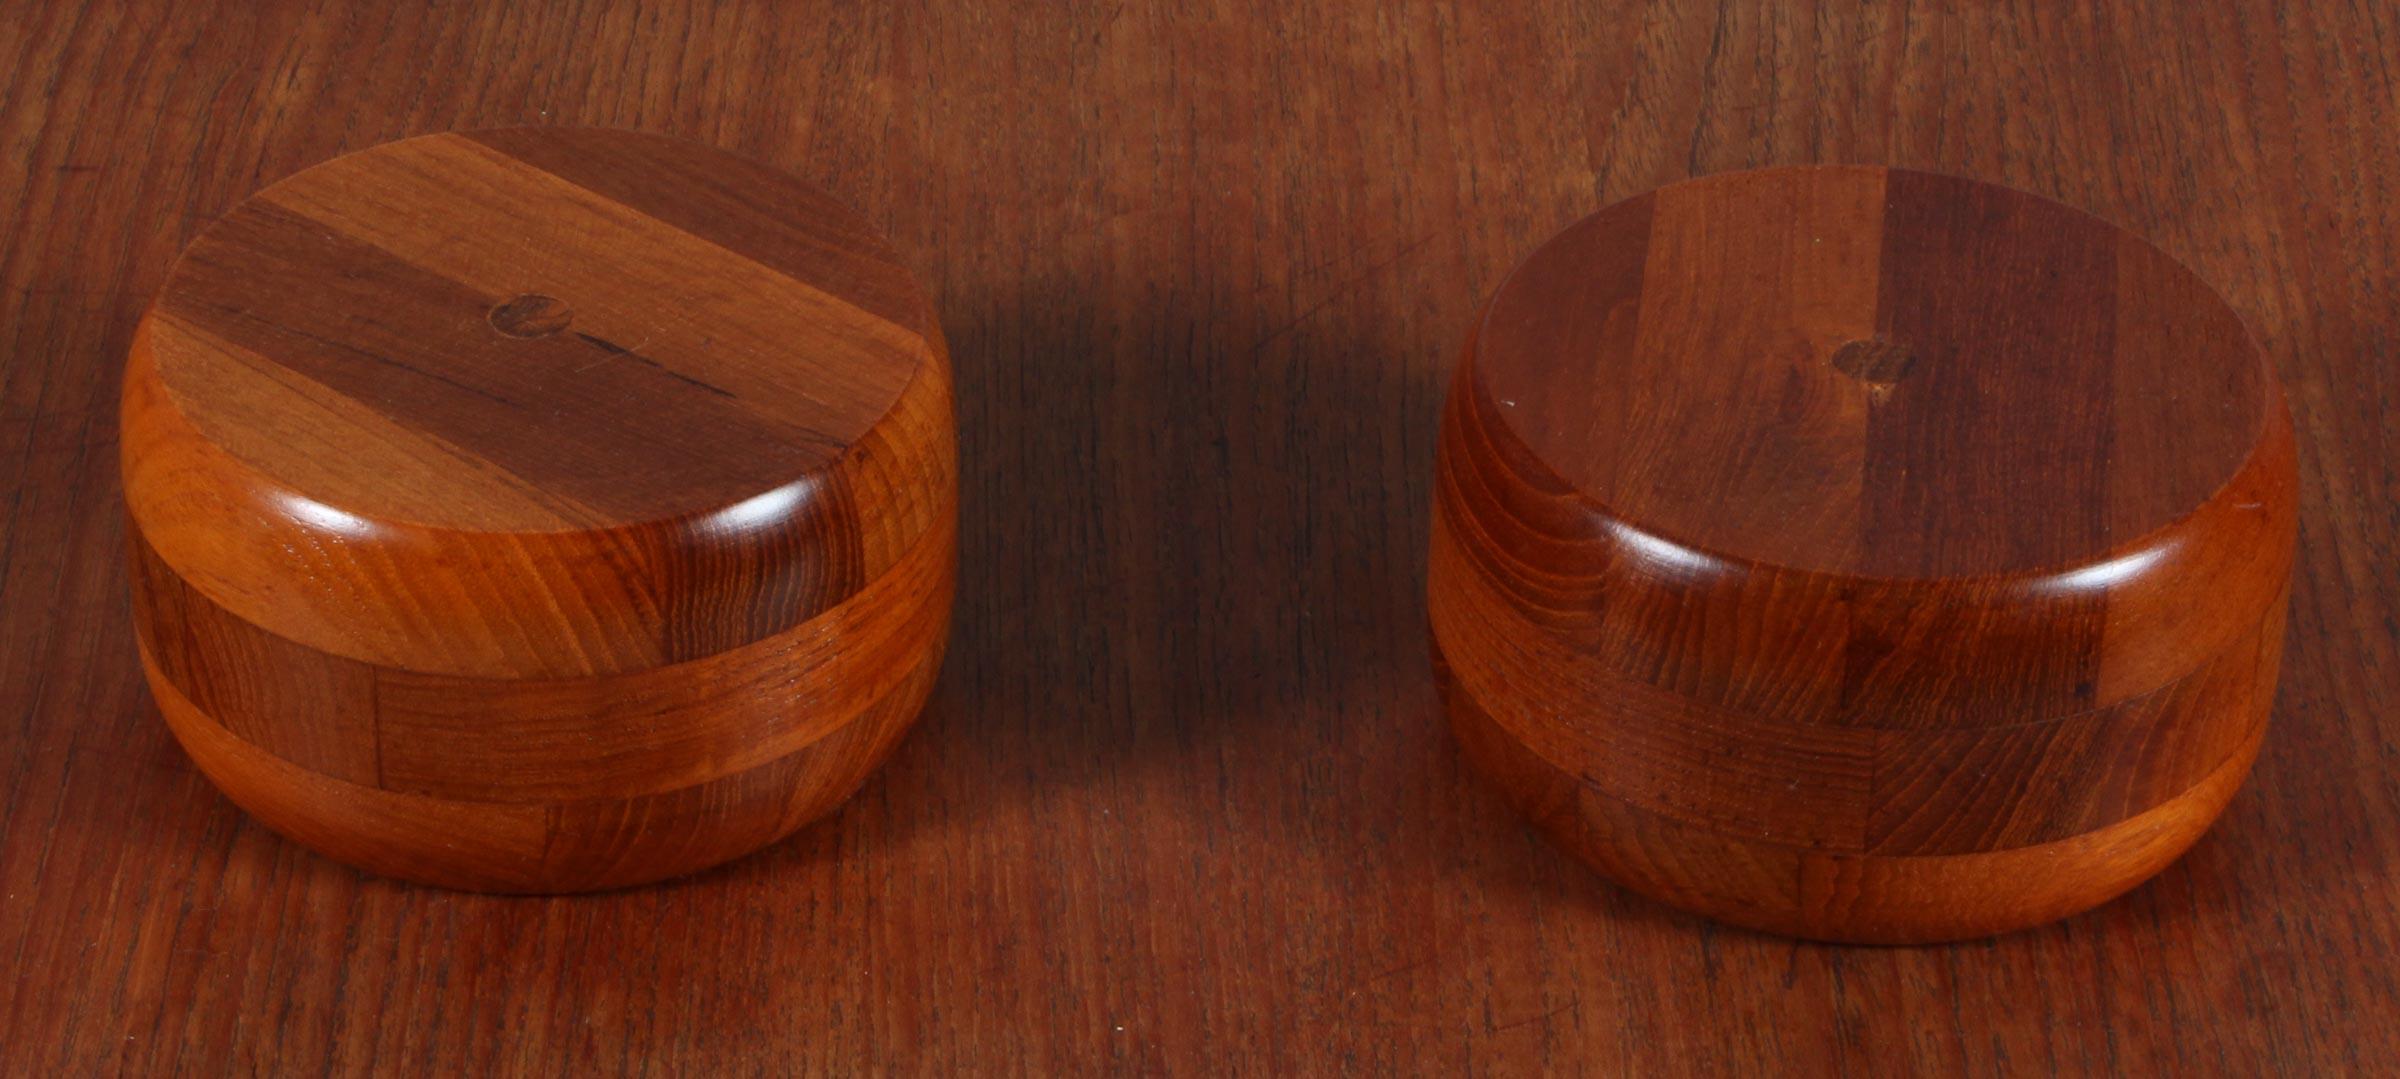 Pair of Solid Teak Bowls In Good Condition For Sale In Esbjerg, DK